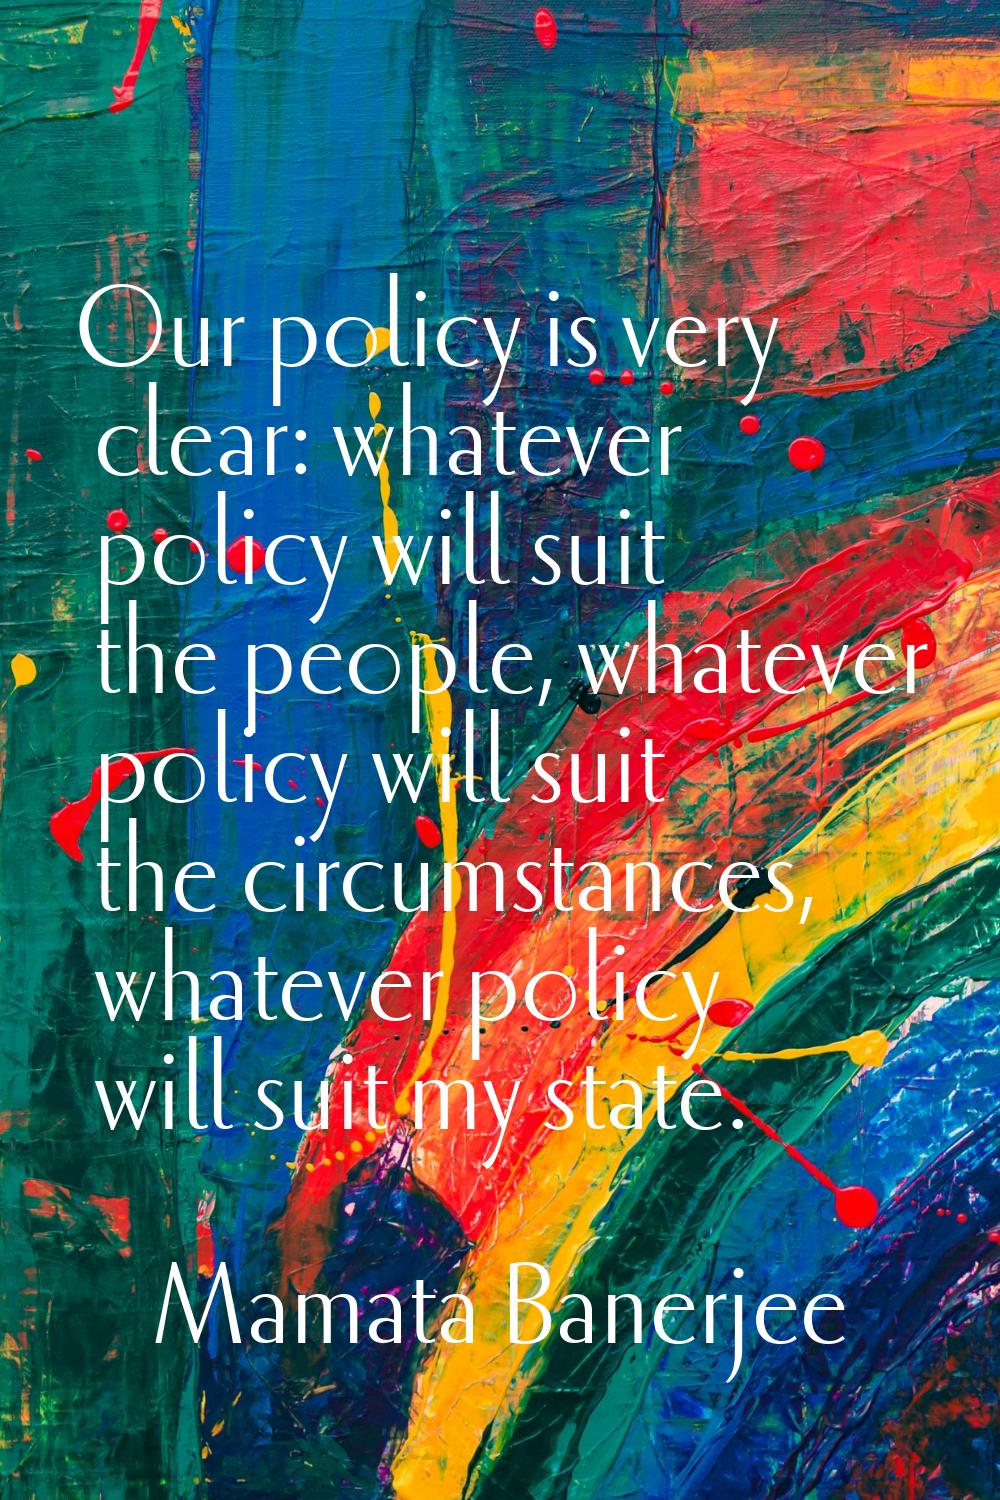 Our policy is very clear: whatever policy will suit the people, whatever policy will suit the circu